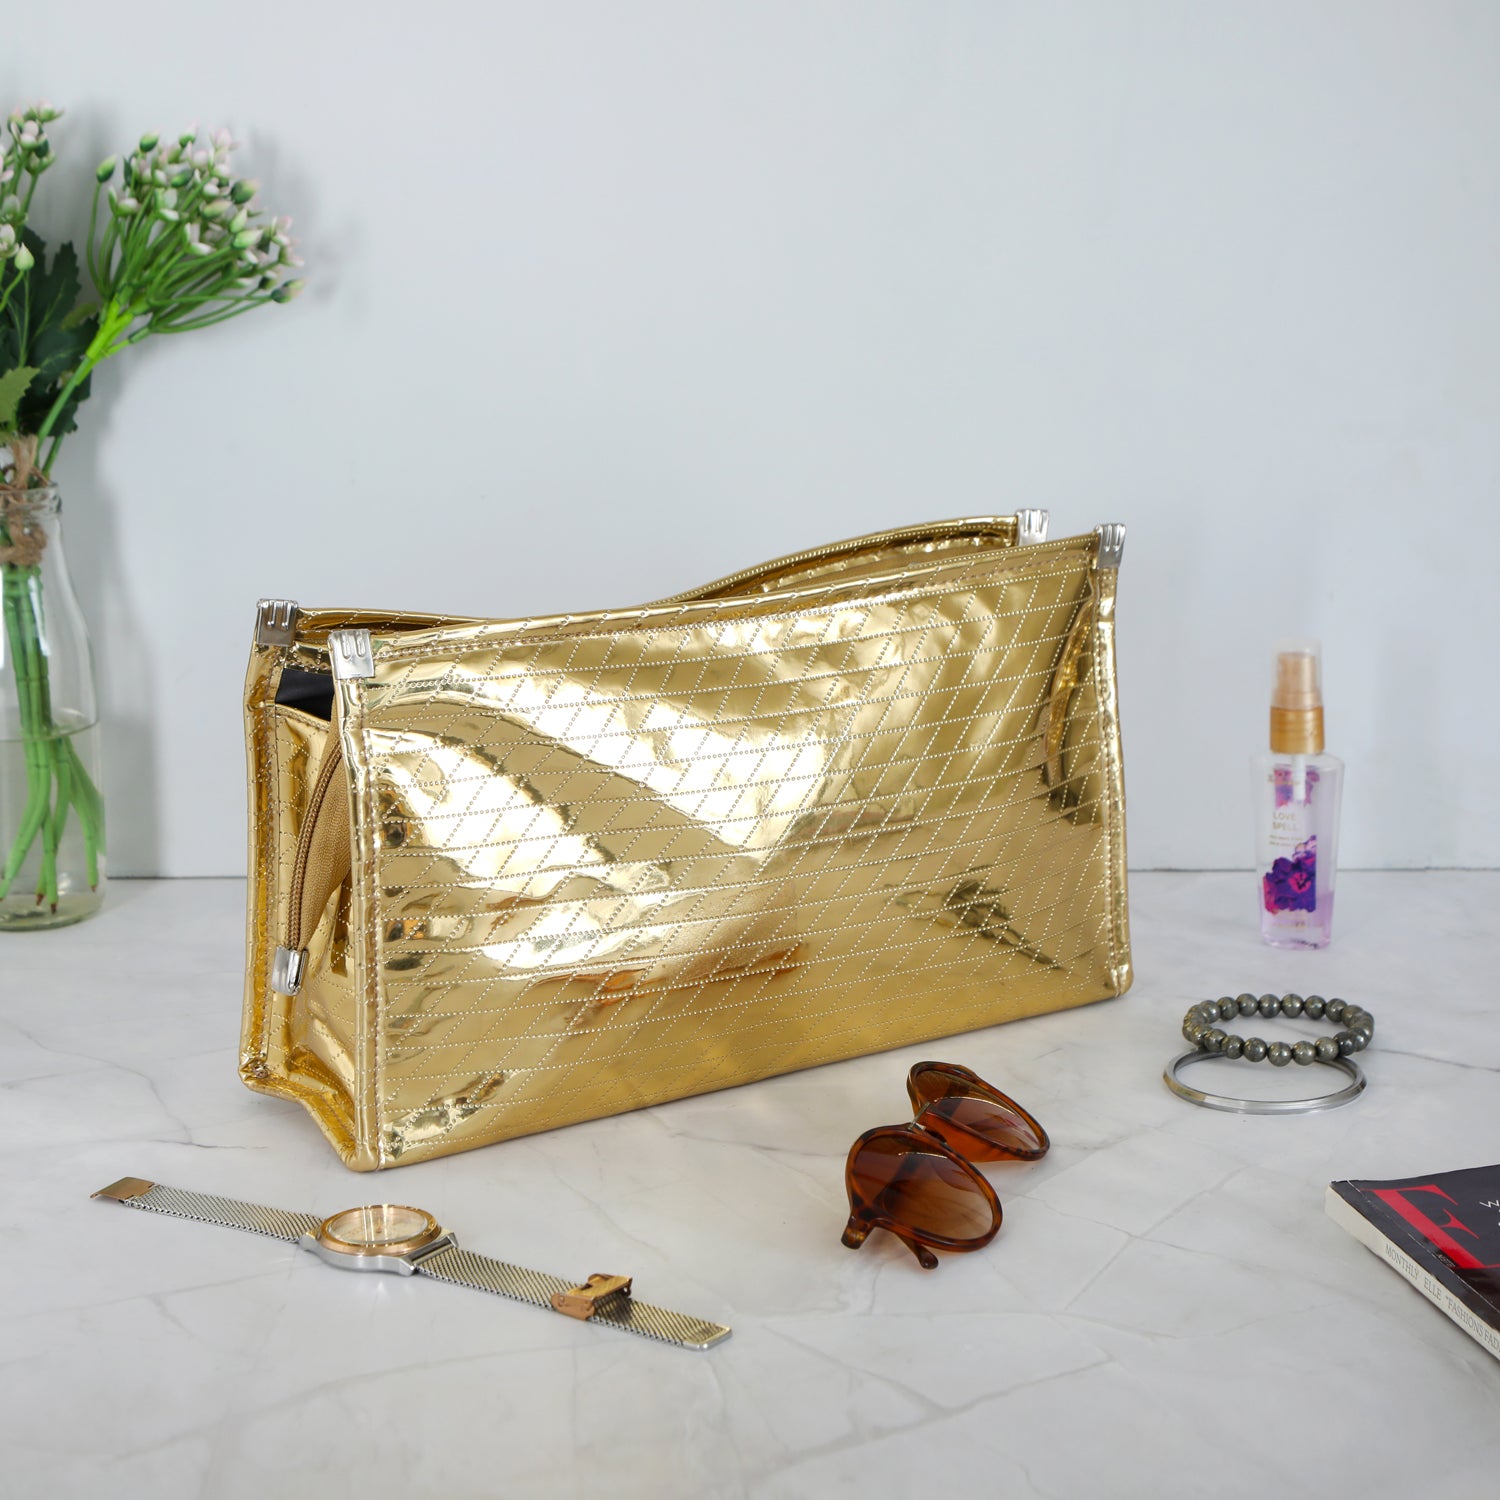 Travel Pouch - Gold 3 Pockets Pouch - Medium (10")